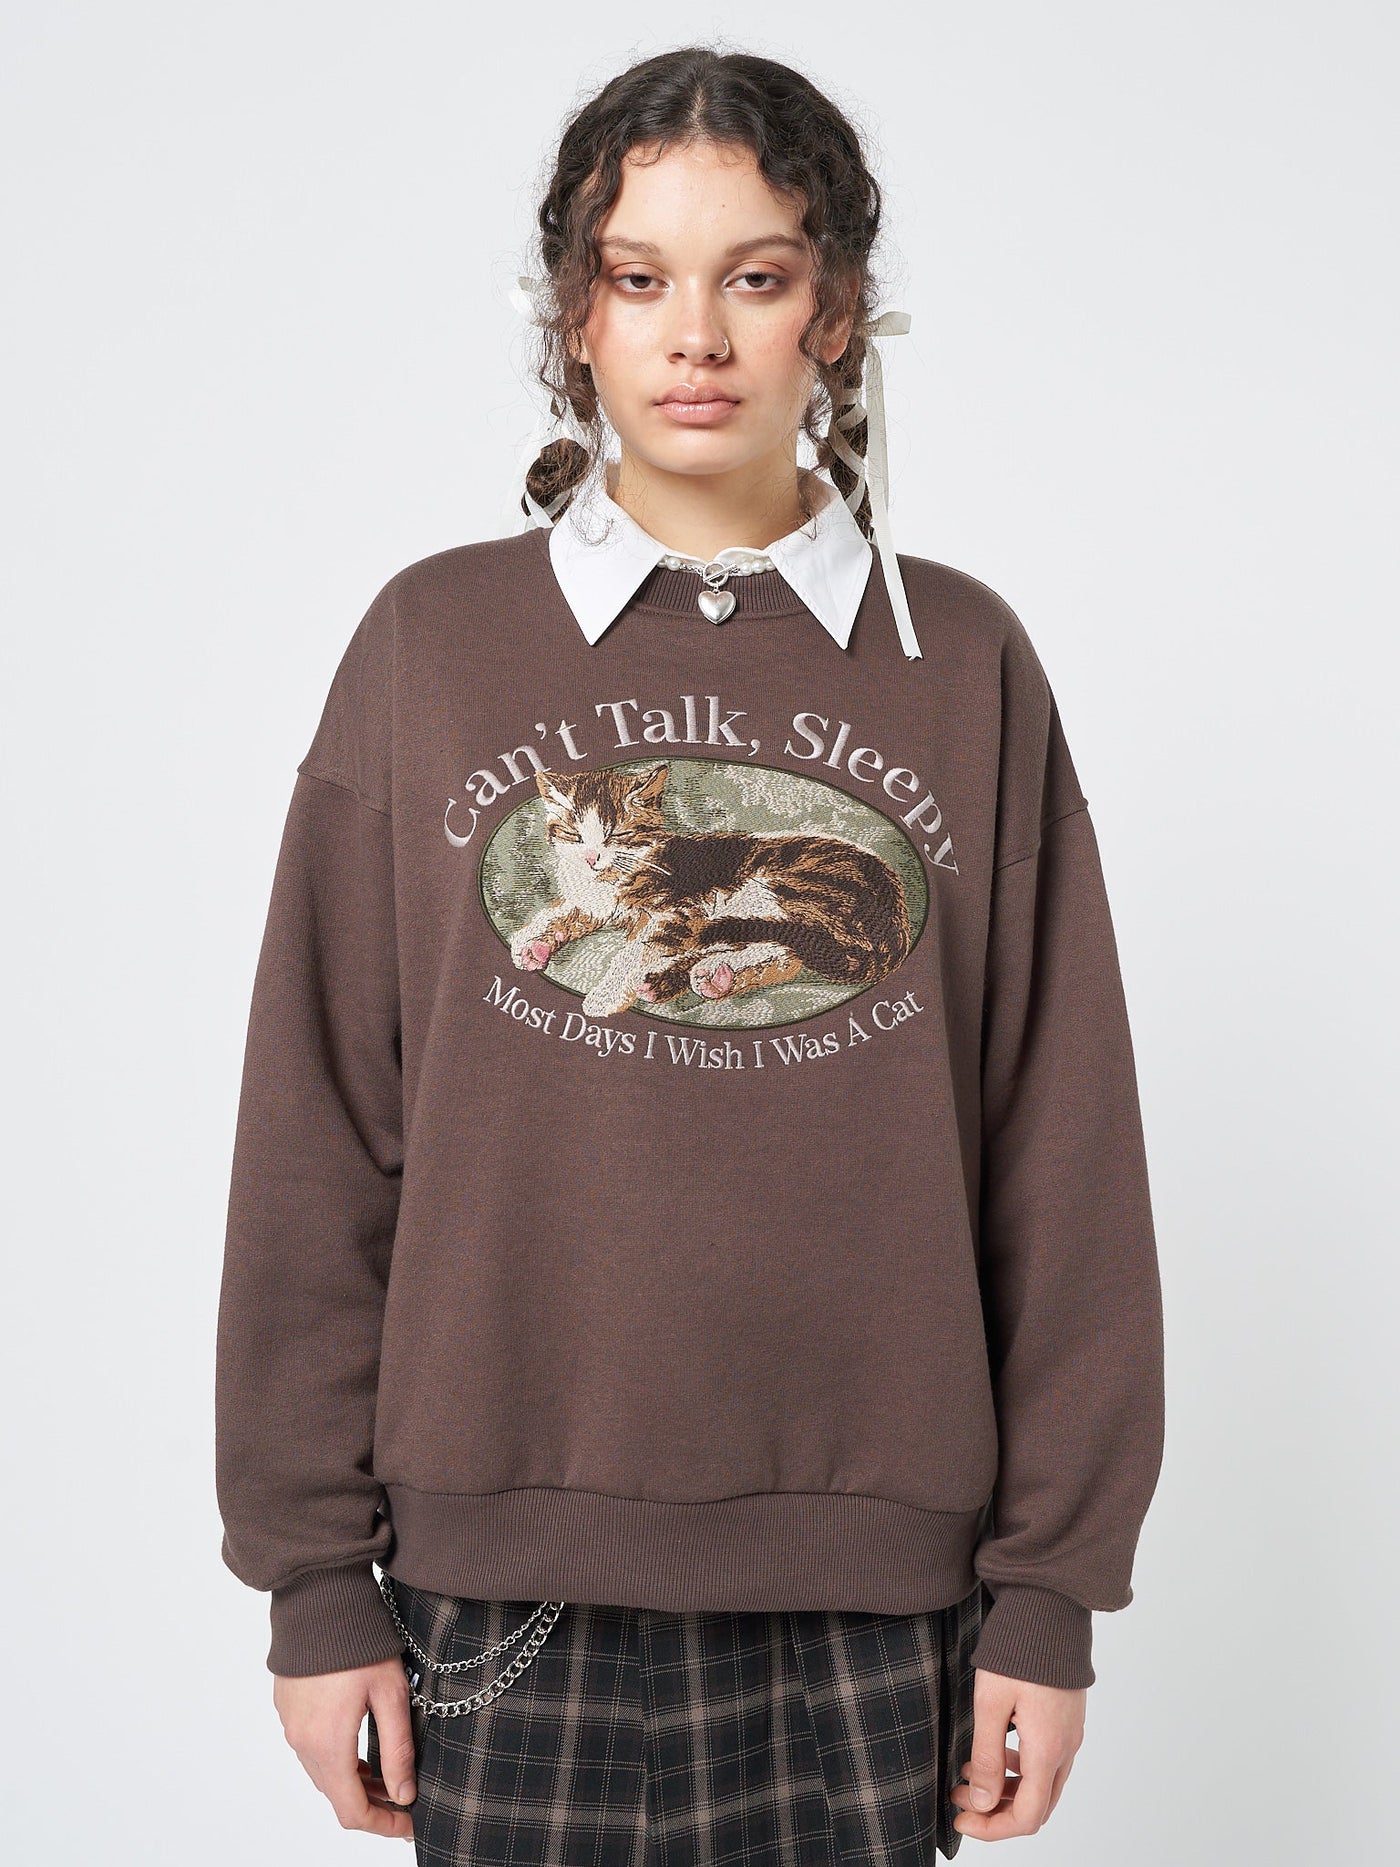 Can’t Talk Cat Embroidered Sweatshirt